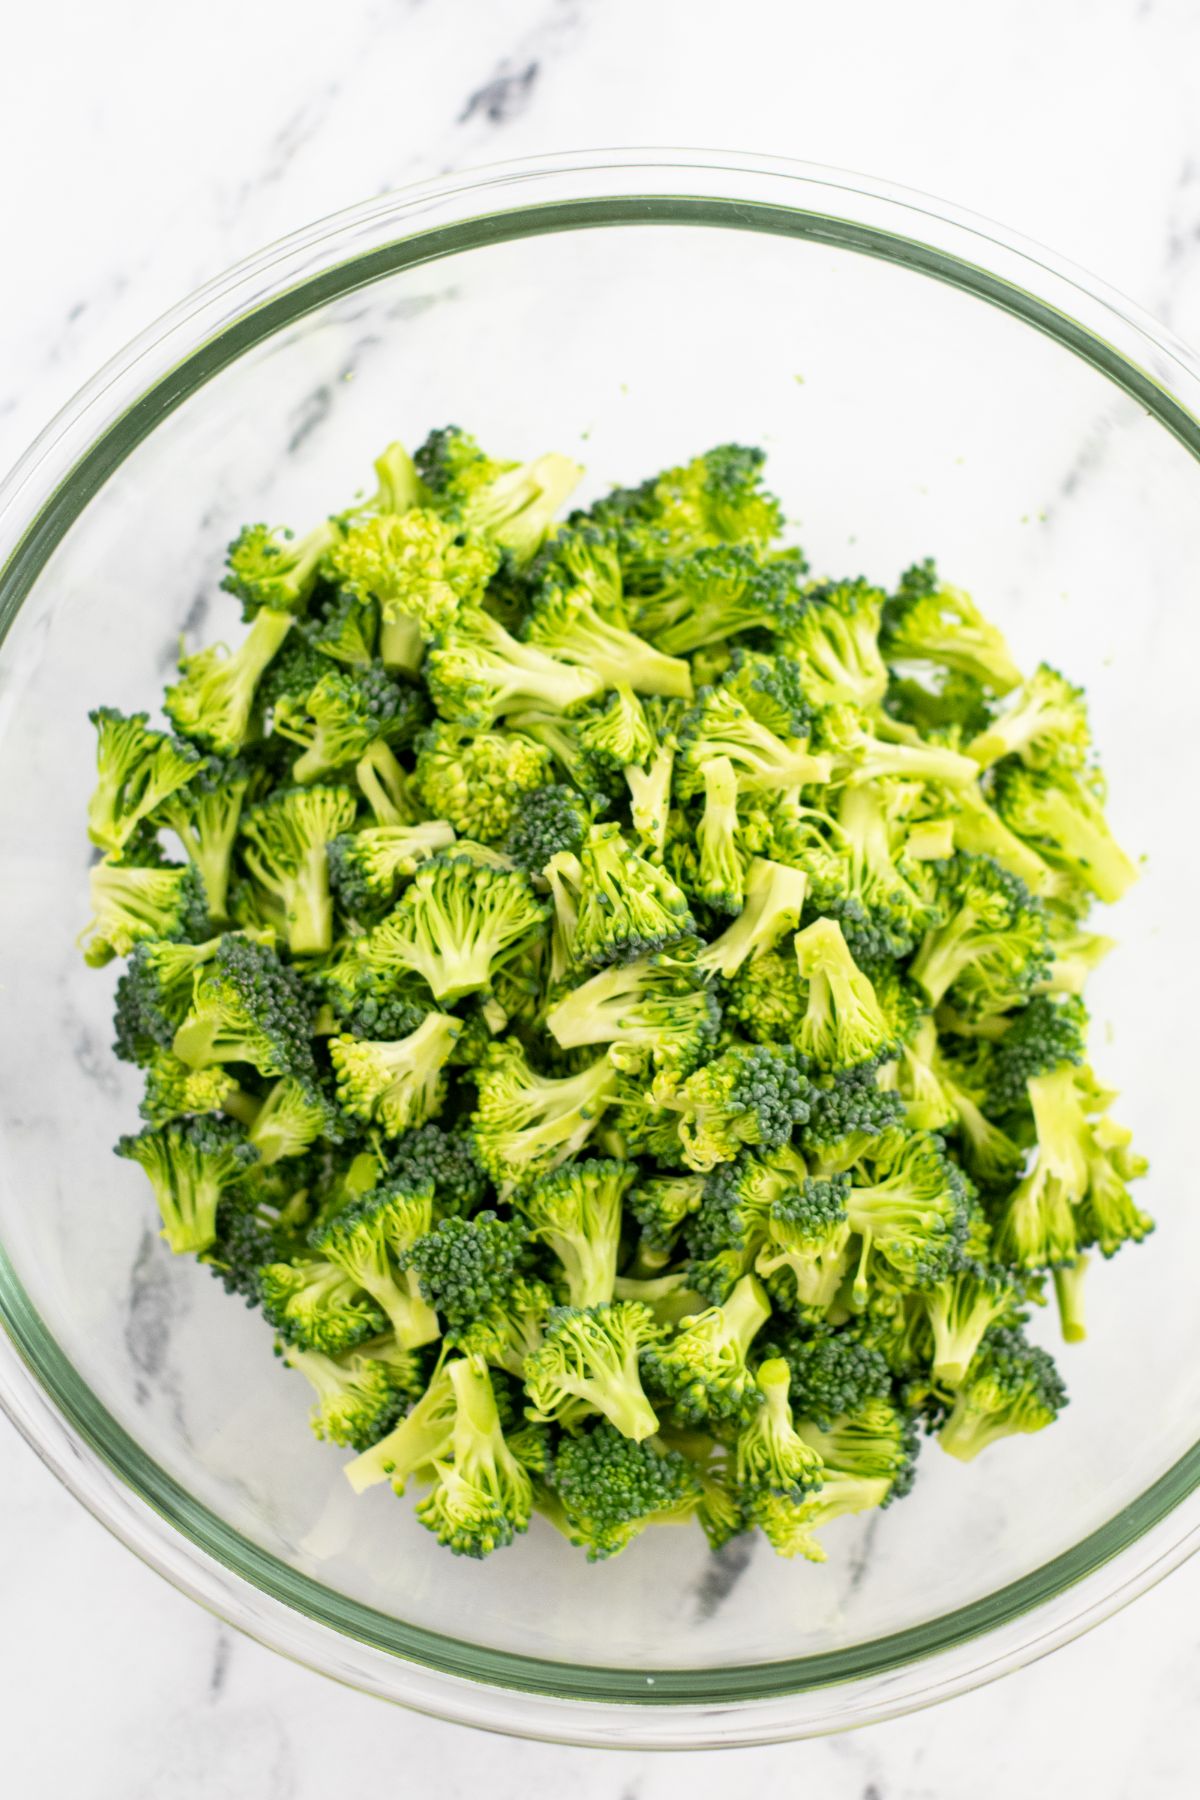 Chopped Broccoli in a glass bowl.